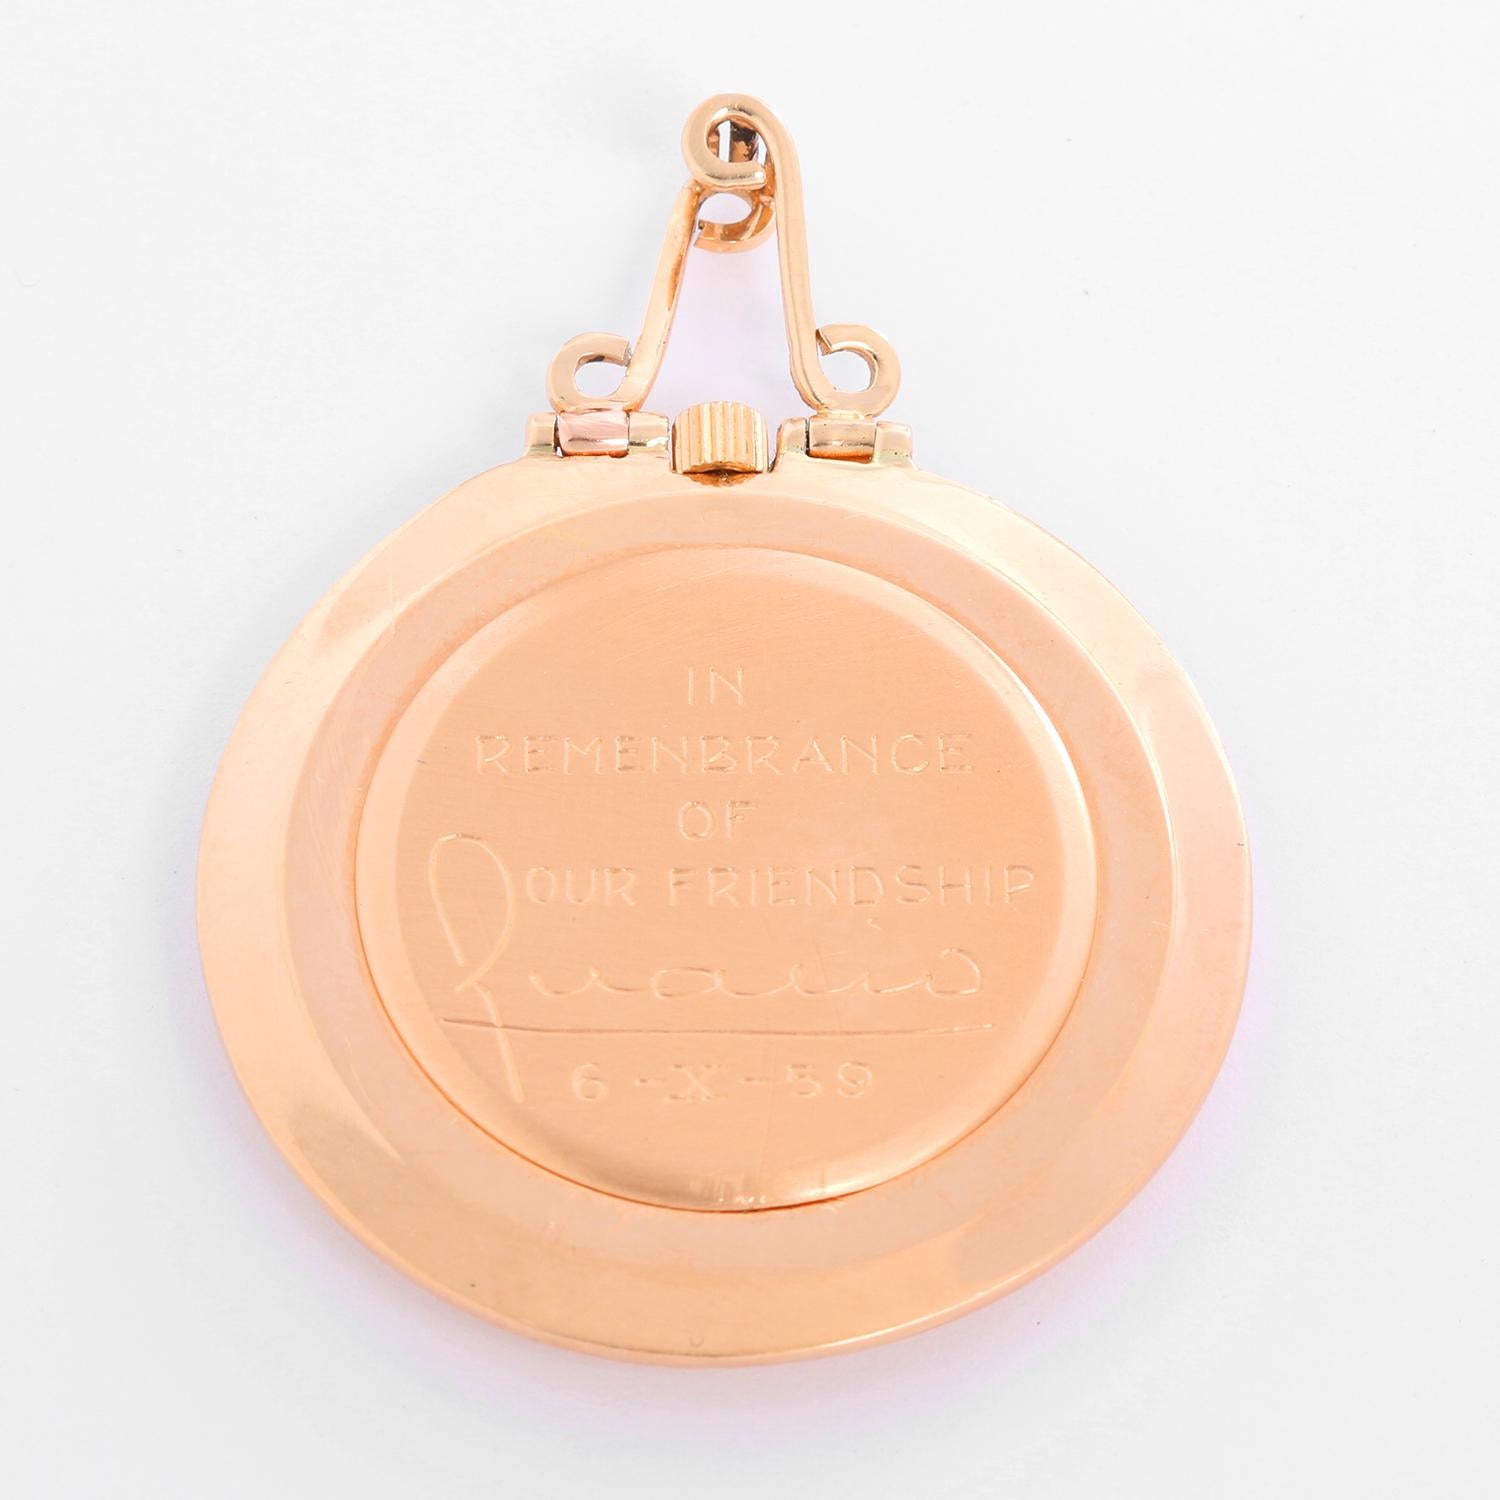 Vacheron Constantin 18K Rose Gold Pendant Pocket Watch - Manual winding. 18K Rose gold ultra thin case ( 35 mm) Beautifully engraved with message on case back  . Champagne dial with stick hour markers. Pre-owned with custom box. Circa 1950's.